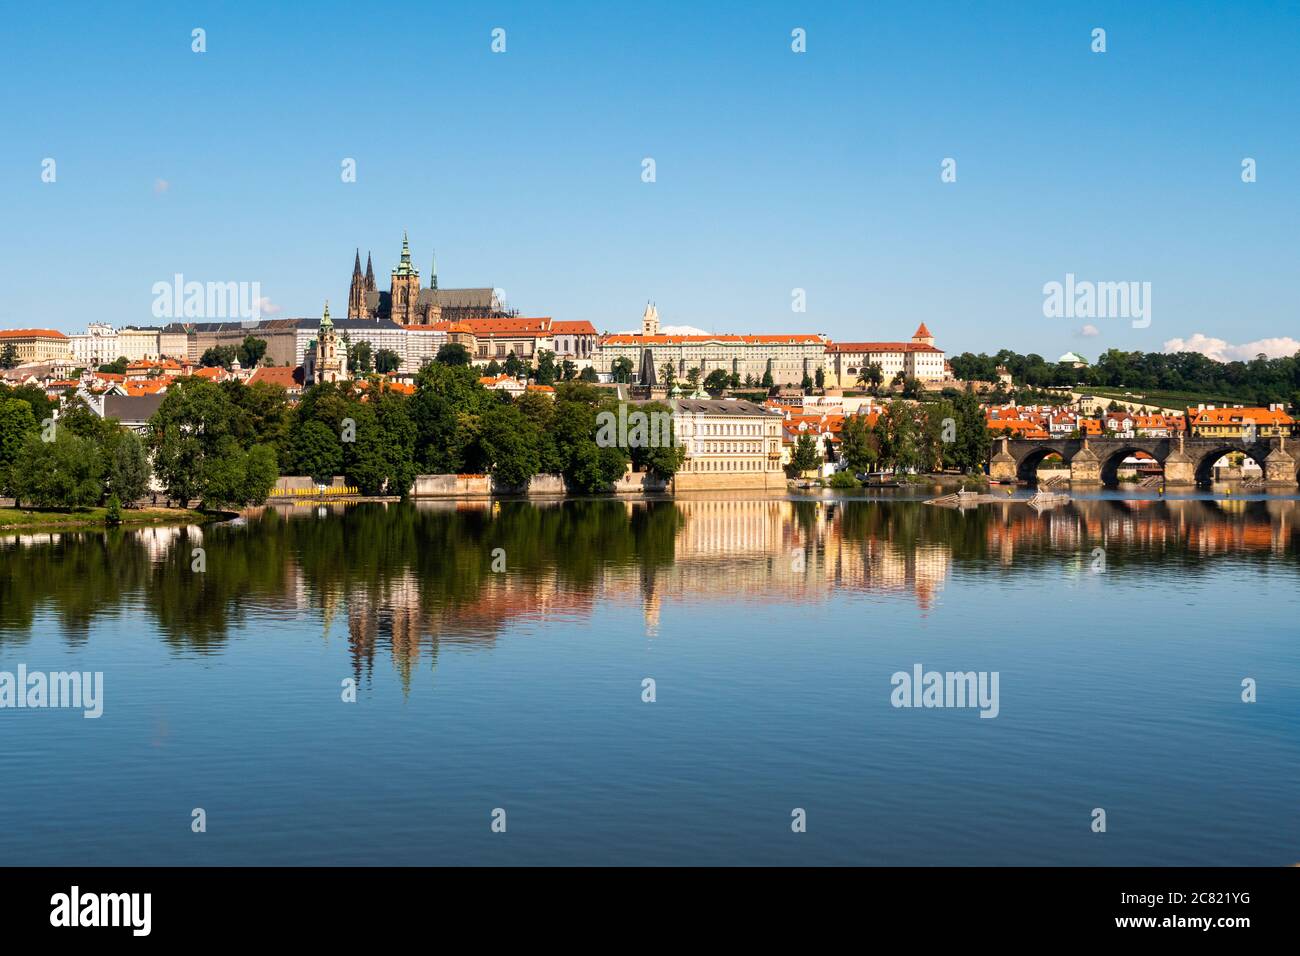 Prague Castle, Hradcany District, Saint Vitus Cathedral and Lesser Town on River Vltava in Summer with Charles Bridge Stock Photo